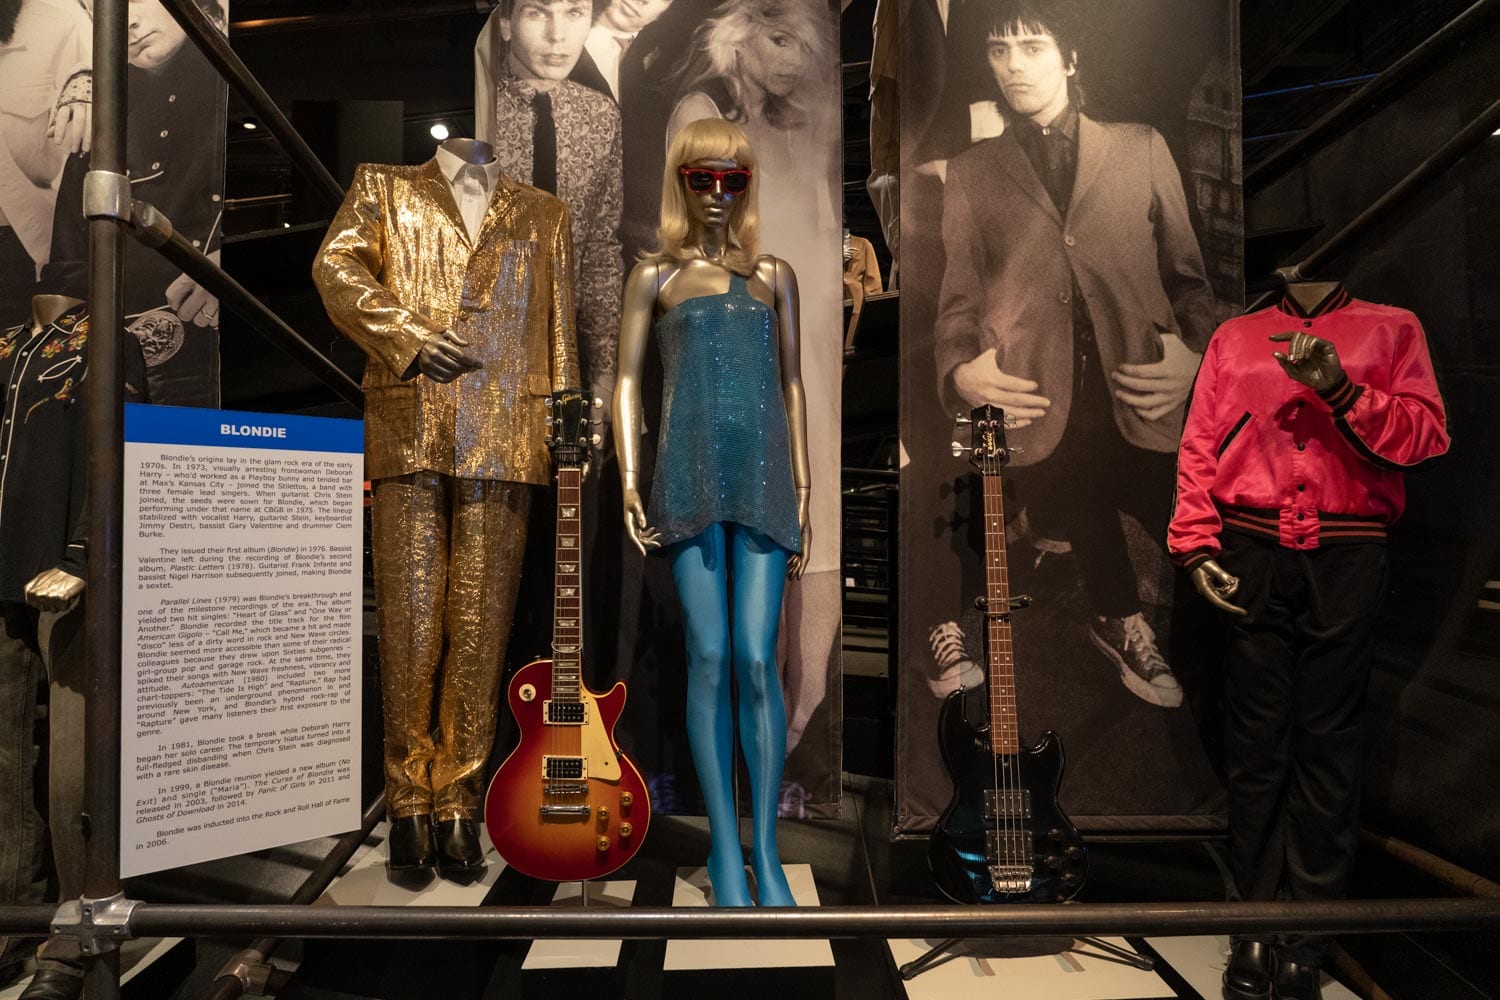 Tips for Visiting the Rock and Roll Hall of Fame in Cleveland